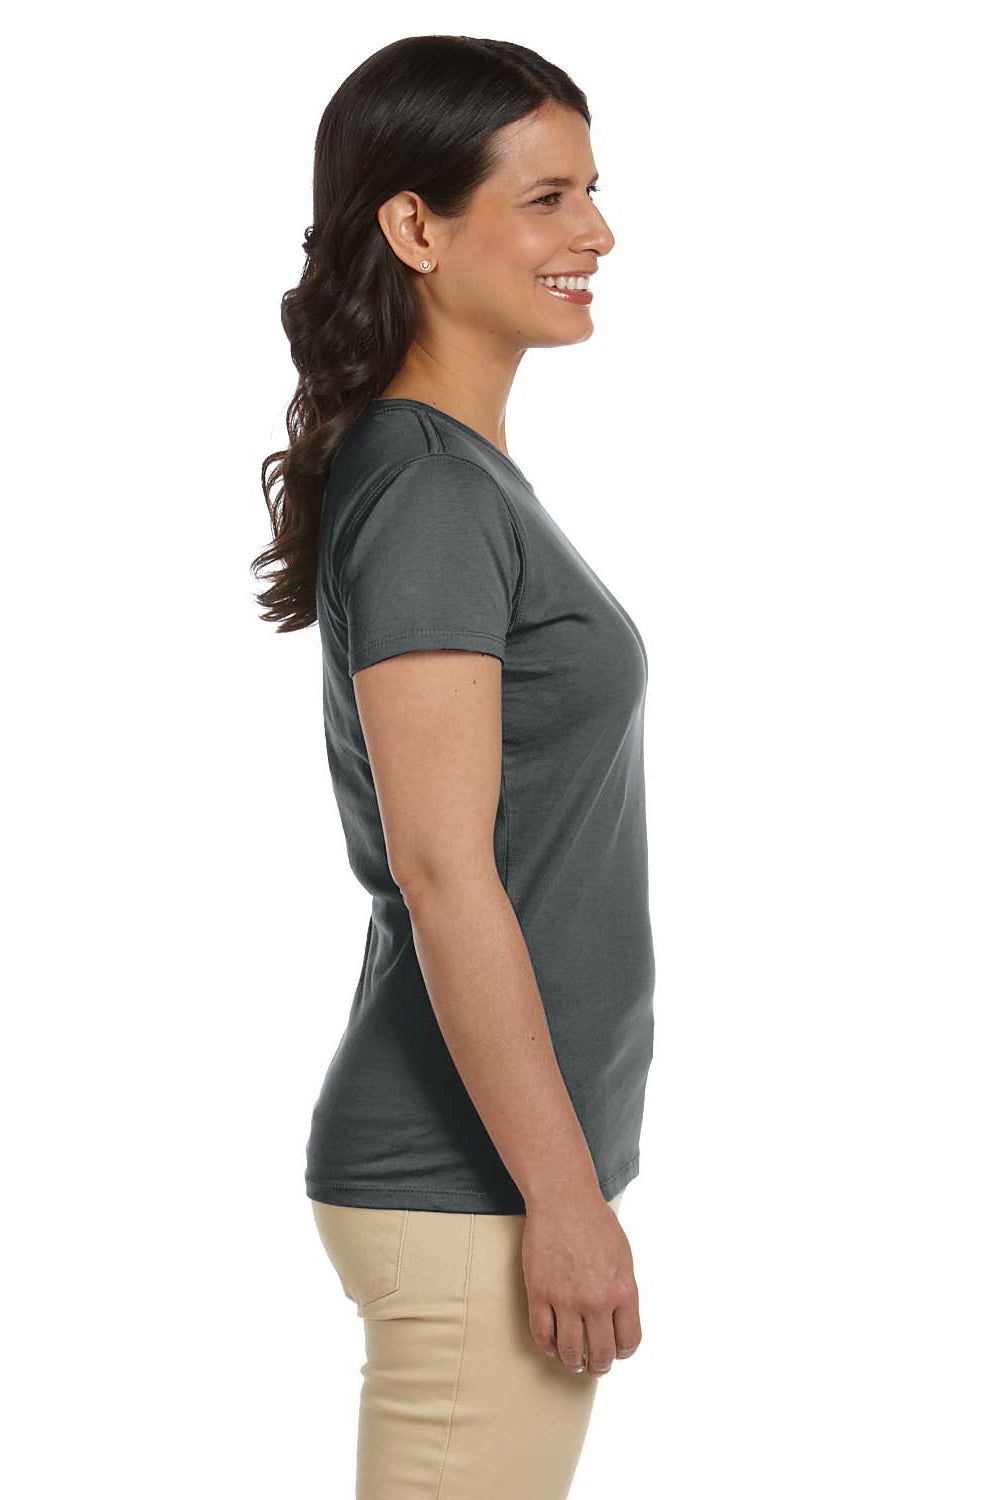 Econscious EC3000 Womens Heather Sueded Short Sleeve Crewneck T-Shirt Charcoal Grey Side